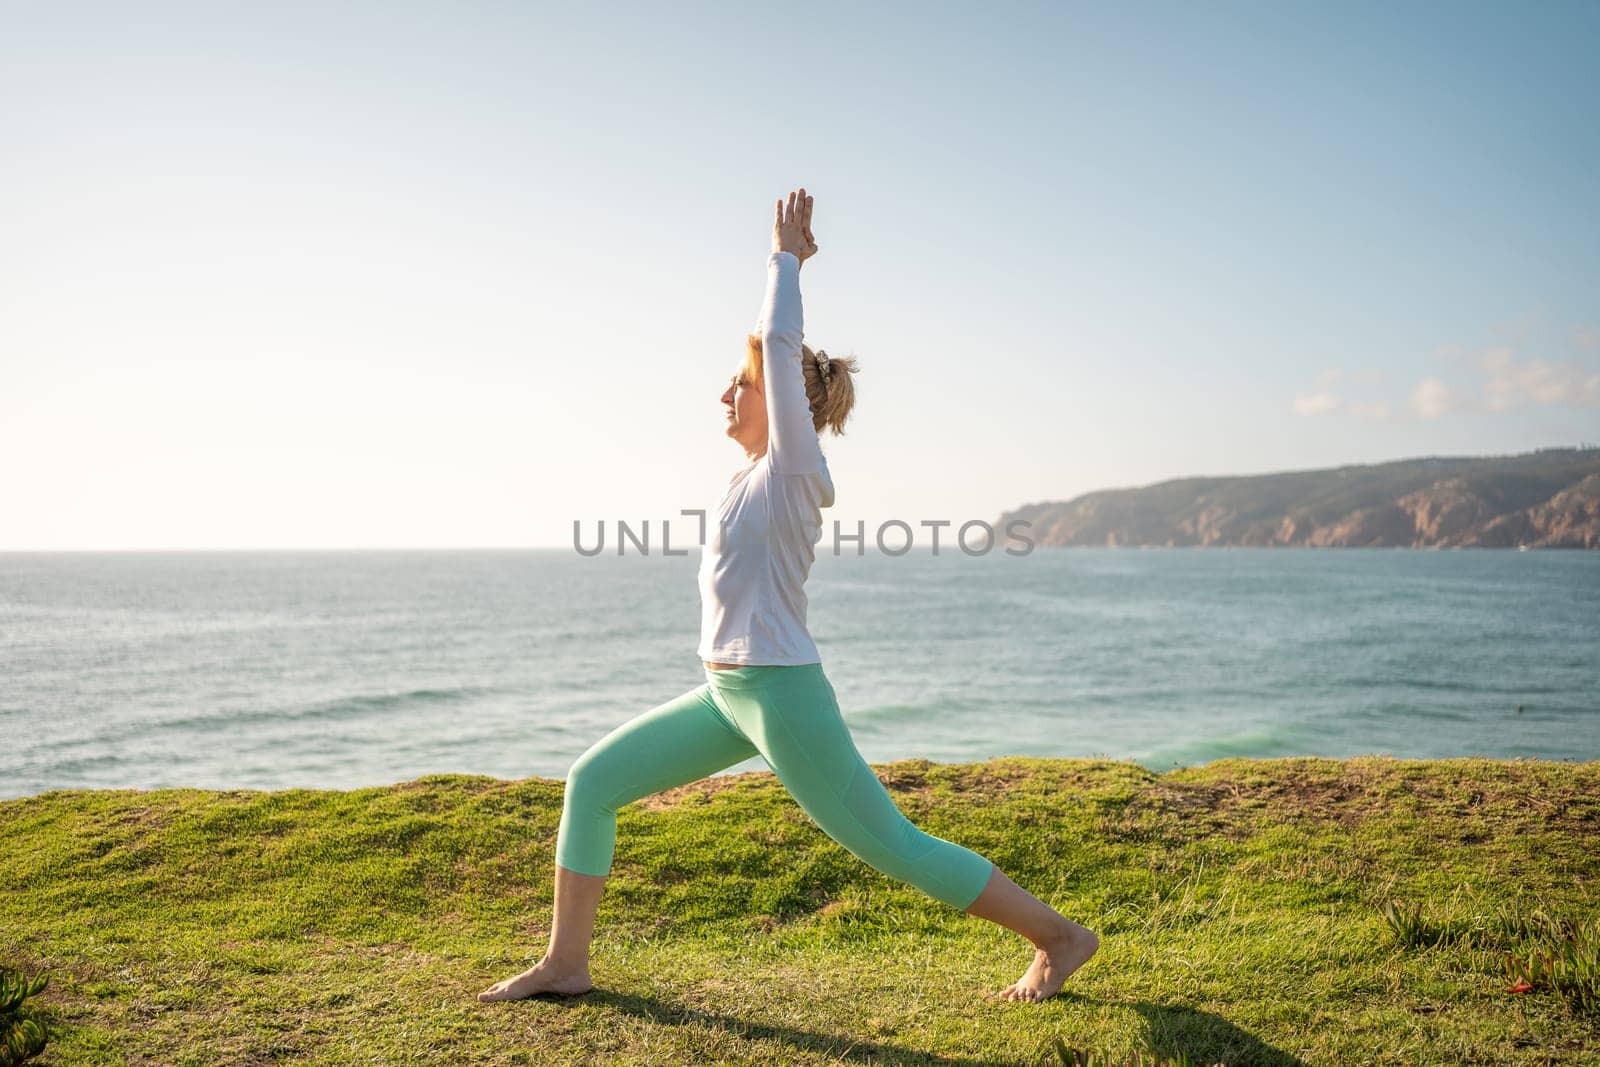 Elderly woman gracefully performs warrior pose, virabhadrasana, on beautiful beach. Practices yoga sunny morning, healthy lifestyle on nature. This serves as wonderful example fitness and wellness.